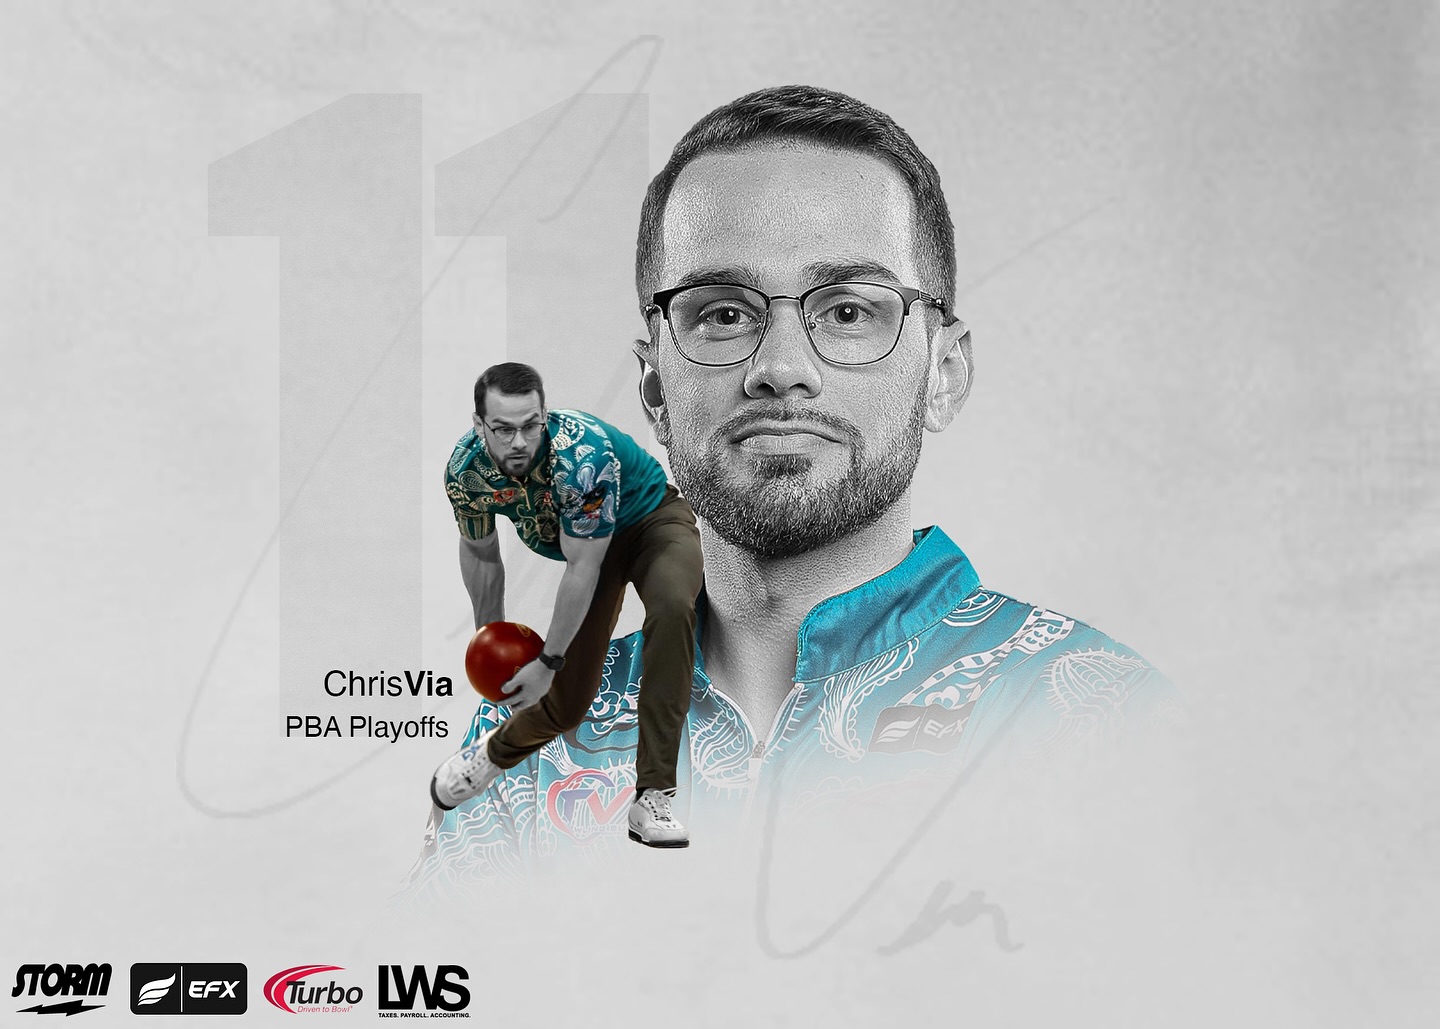 Columbus Ohio's Chris Via competes in the pba playoffs, image from chris via facebook page.